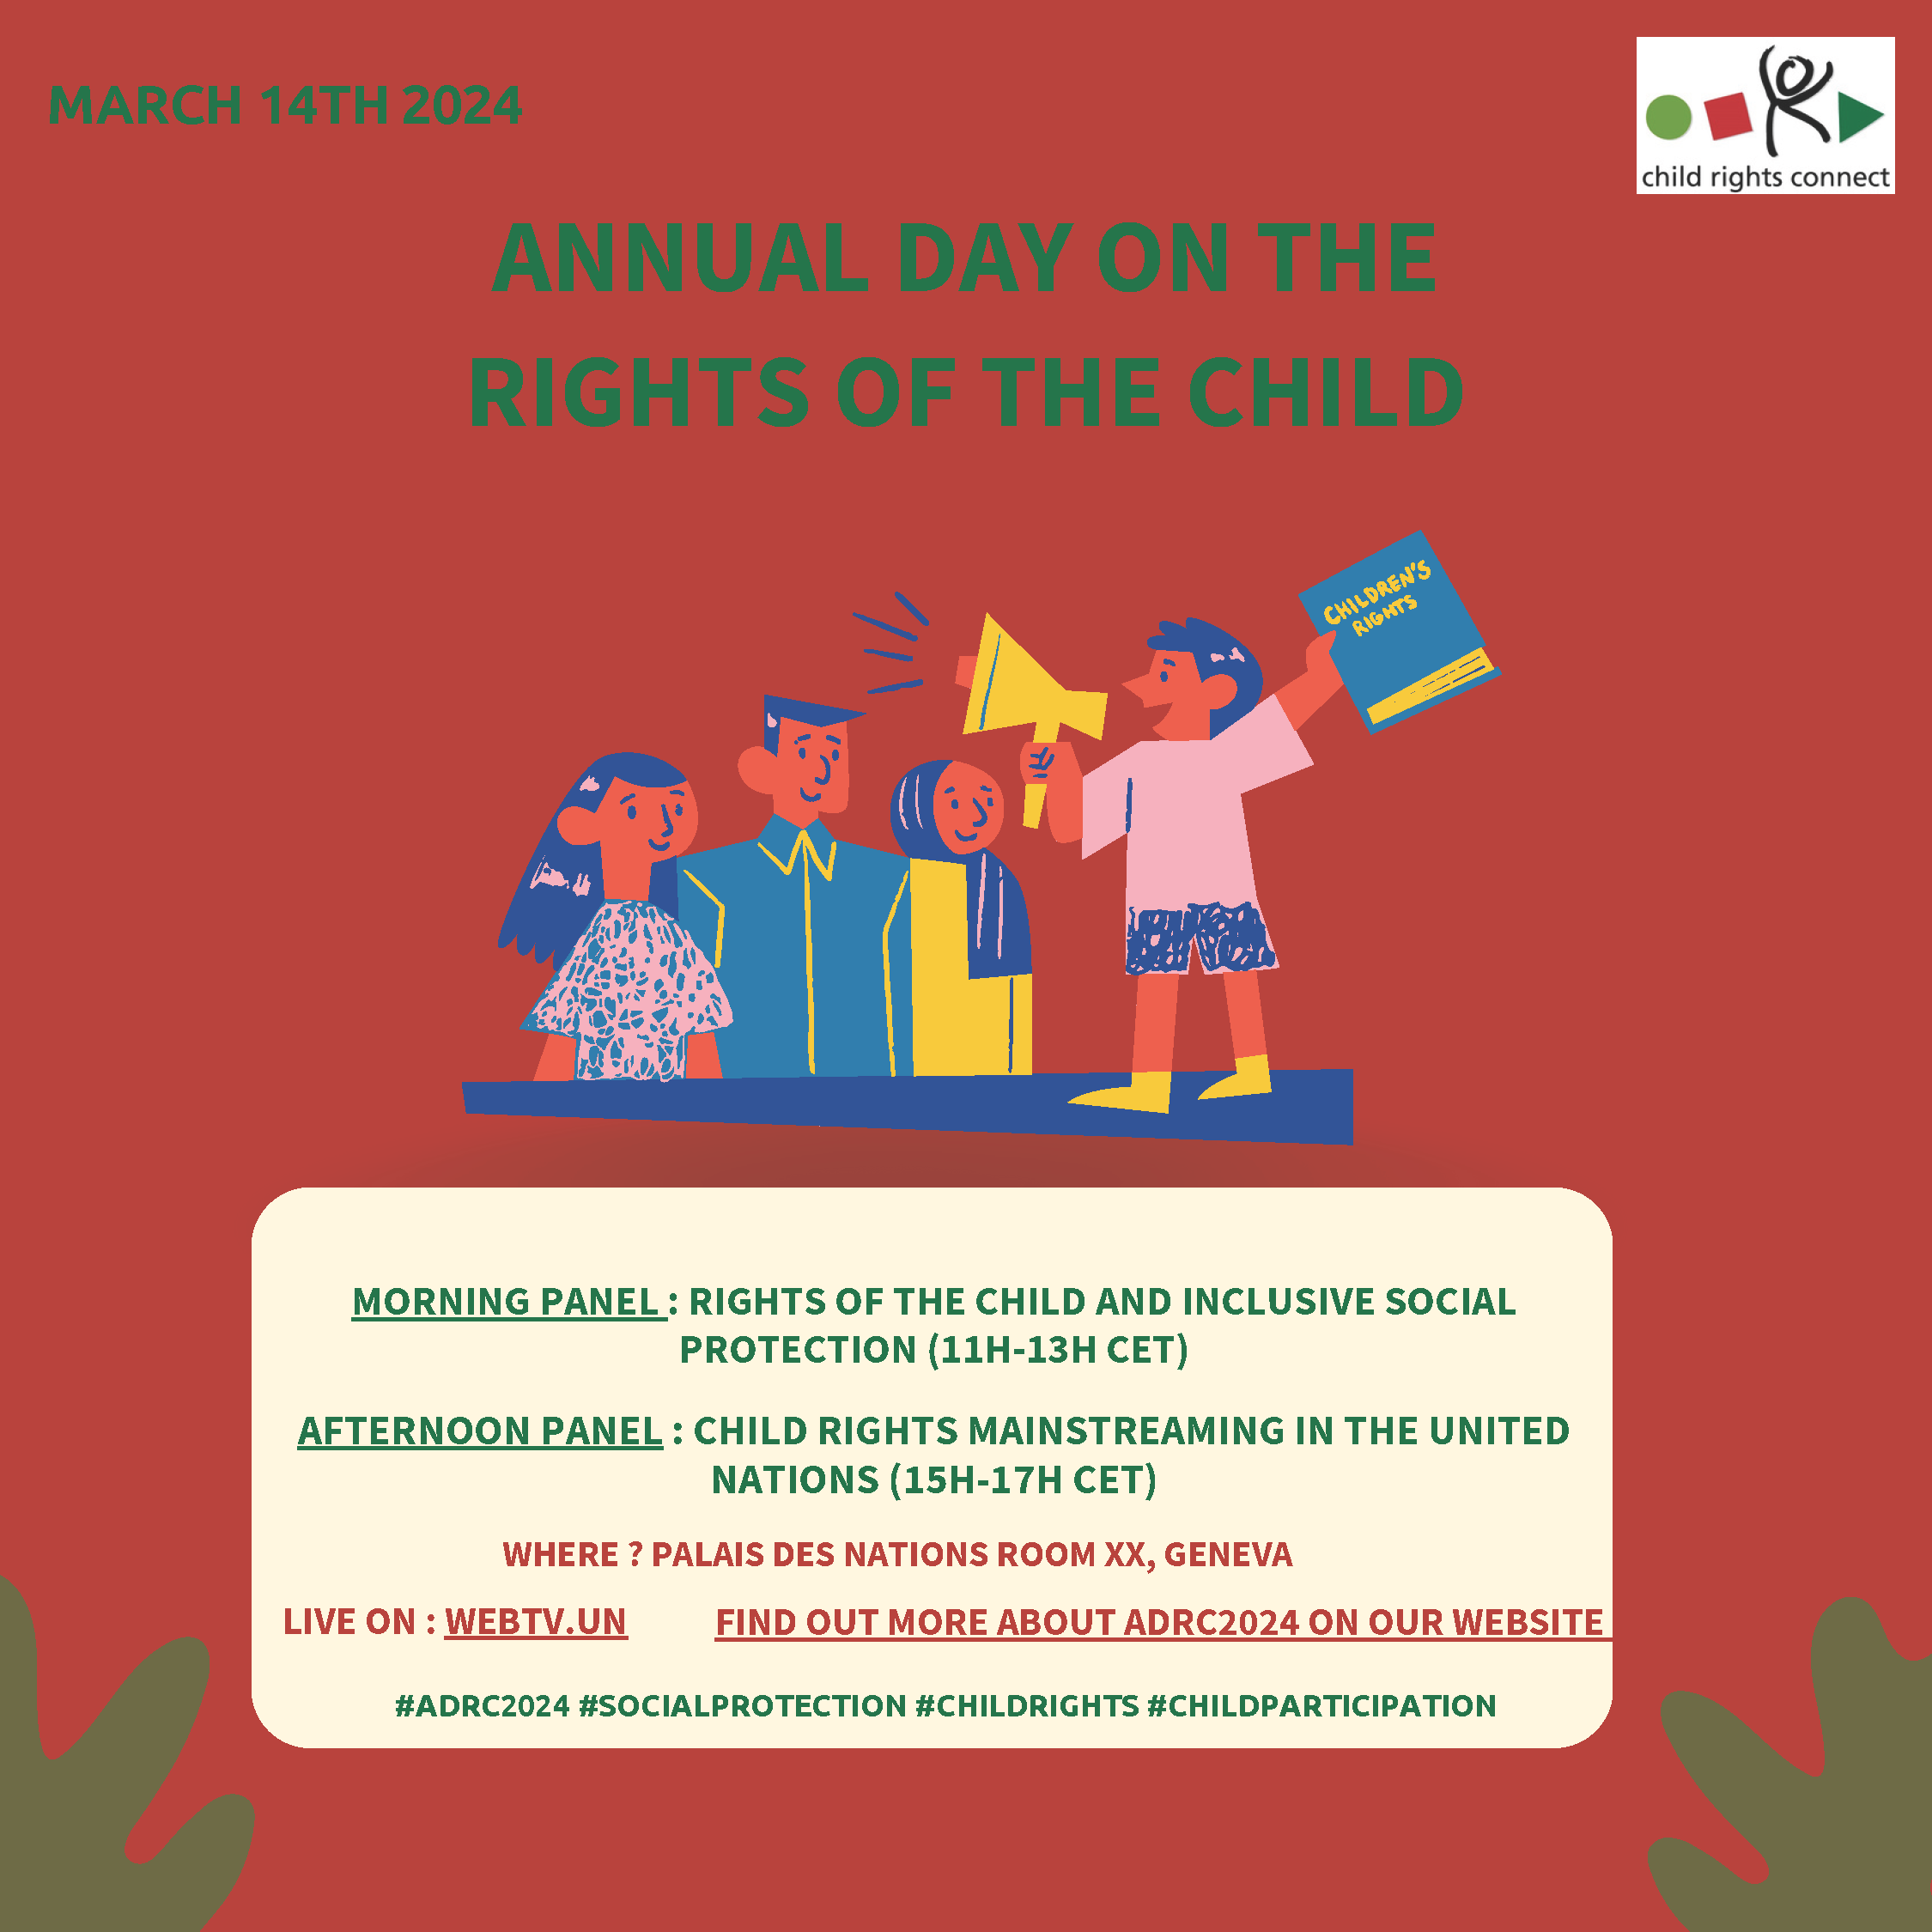 Annual Day on the Rights of the Child - Child Rights Connect - March 14 2024